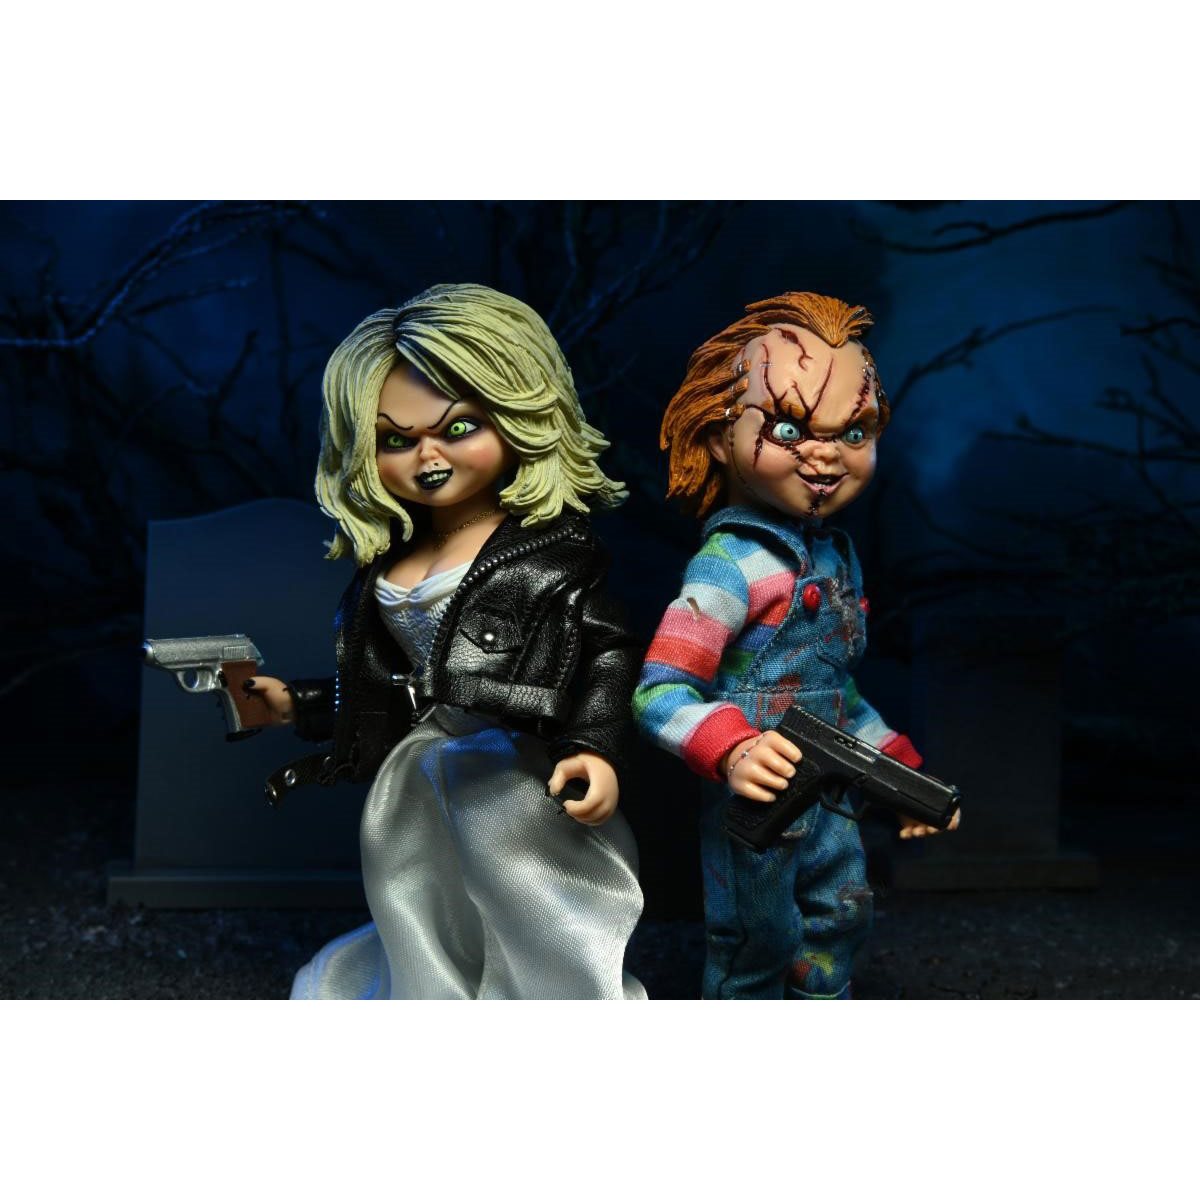 Bride of Chucky Chucky and Tiffany 8 Inch Scale Clothed Action